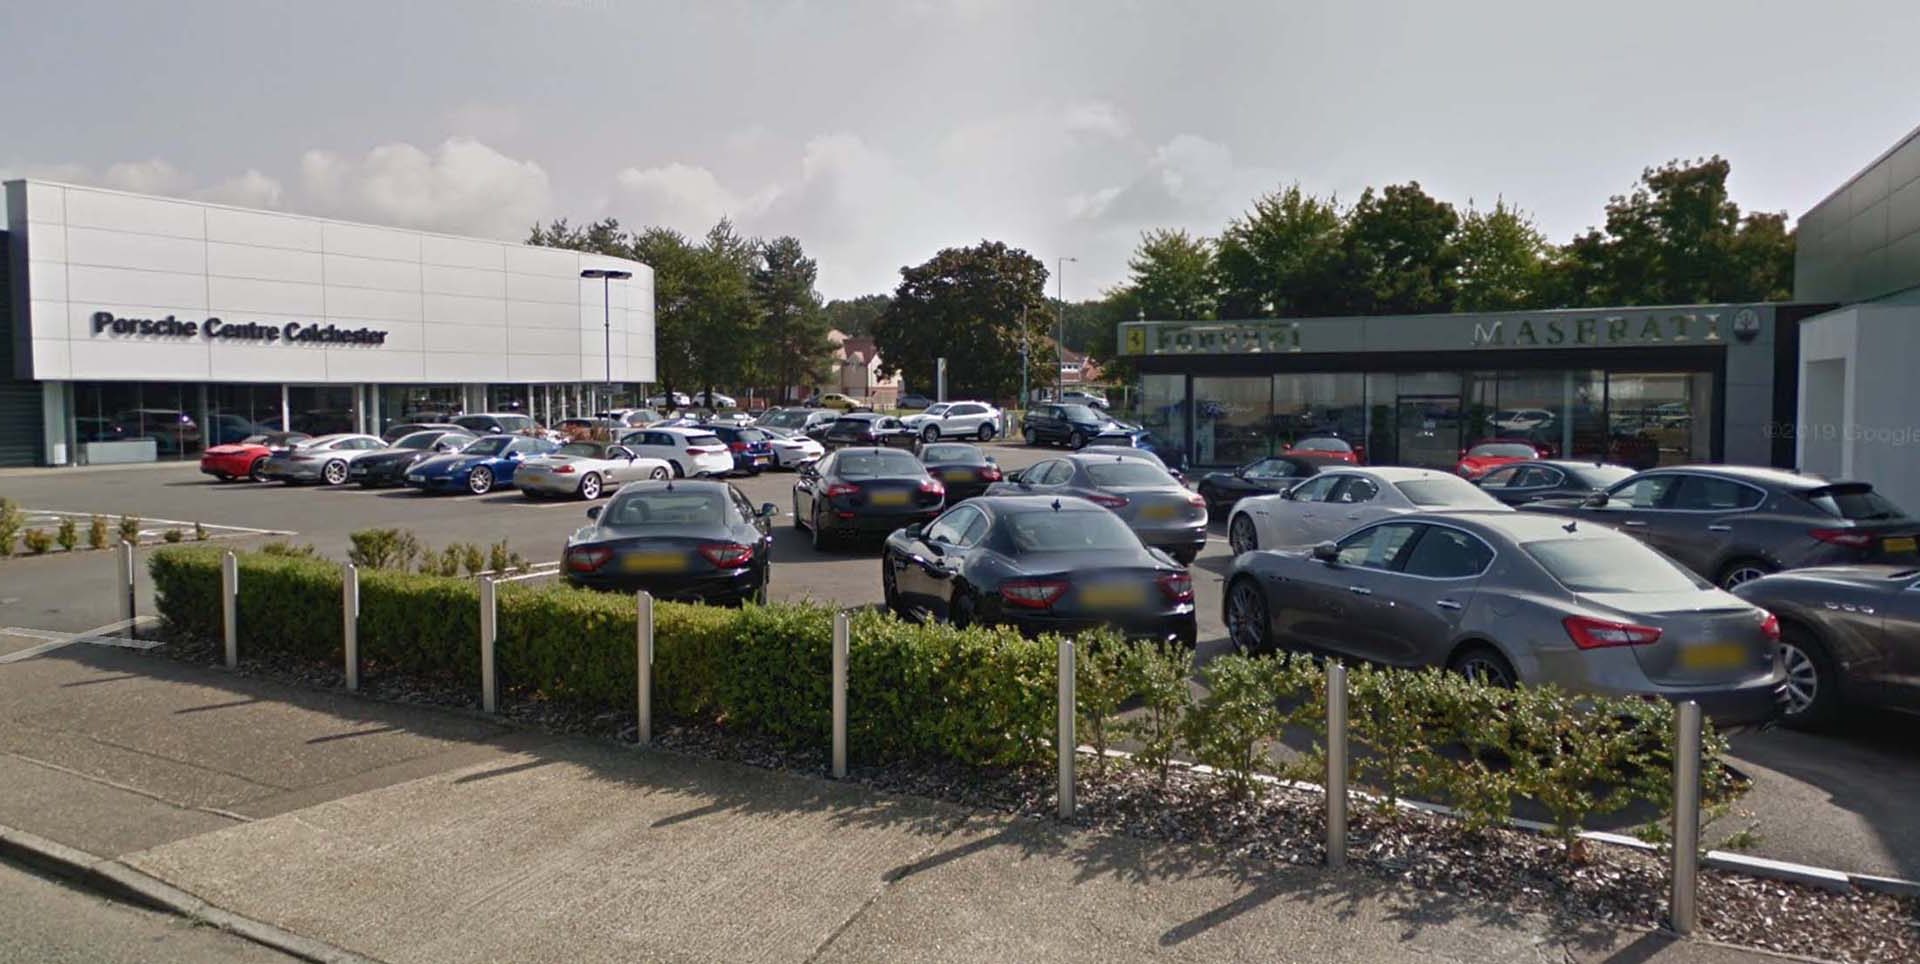 Jardine Motors Group suffers catastrophic year as £8.3m operating